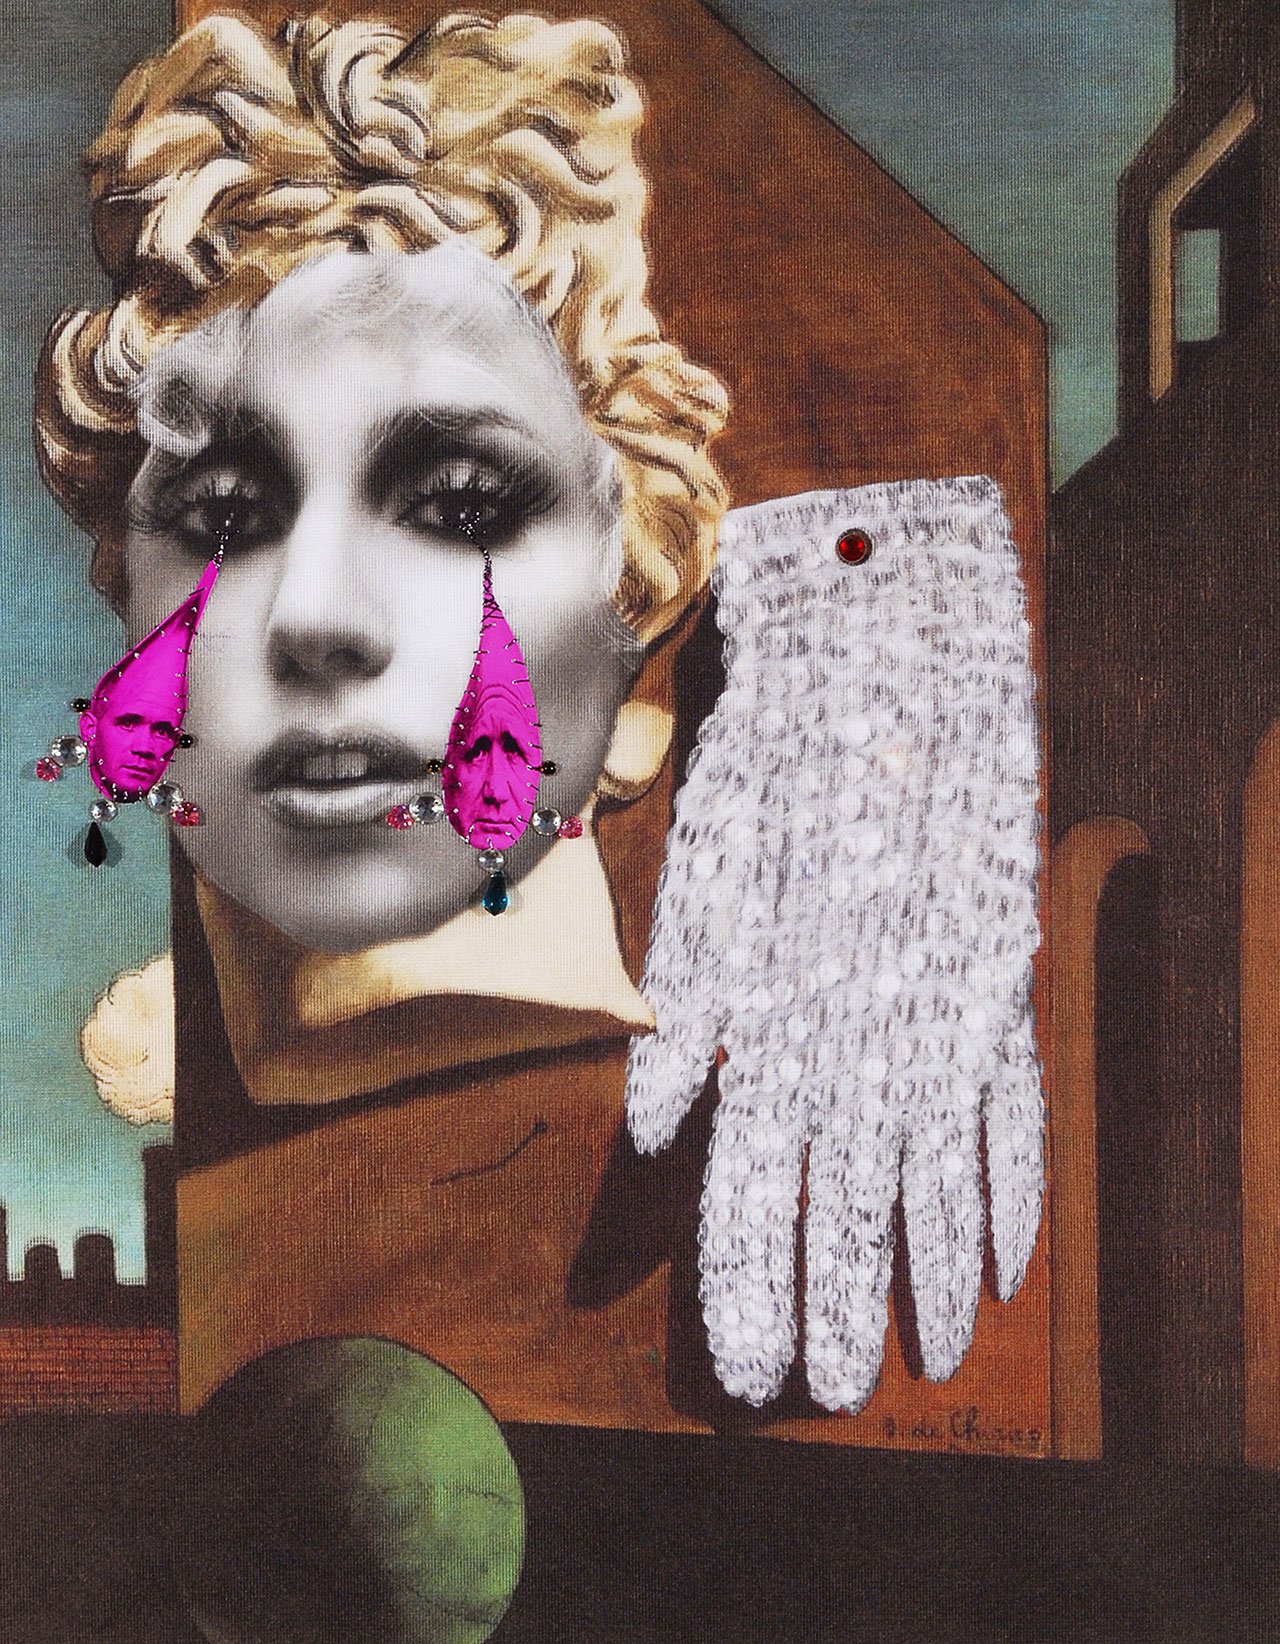 Francesco Vezzoli, Le Gant d’amour (After de Chirico and Jean Genet)[Detail], 2010.
Inkjet print on canvas, metallic embroidery, custom jewelry, paper. 74.5 x 61.5 cm.
Courtesy the artist and APALAZZOGALLERY